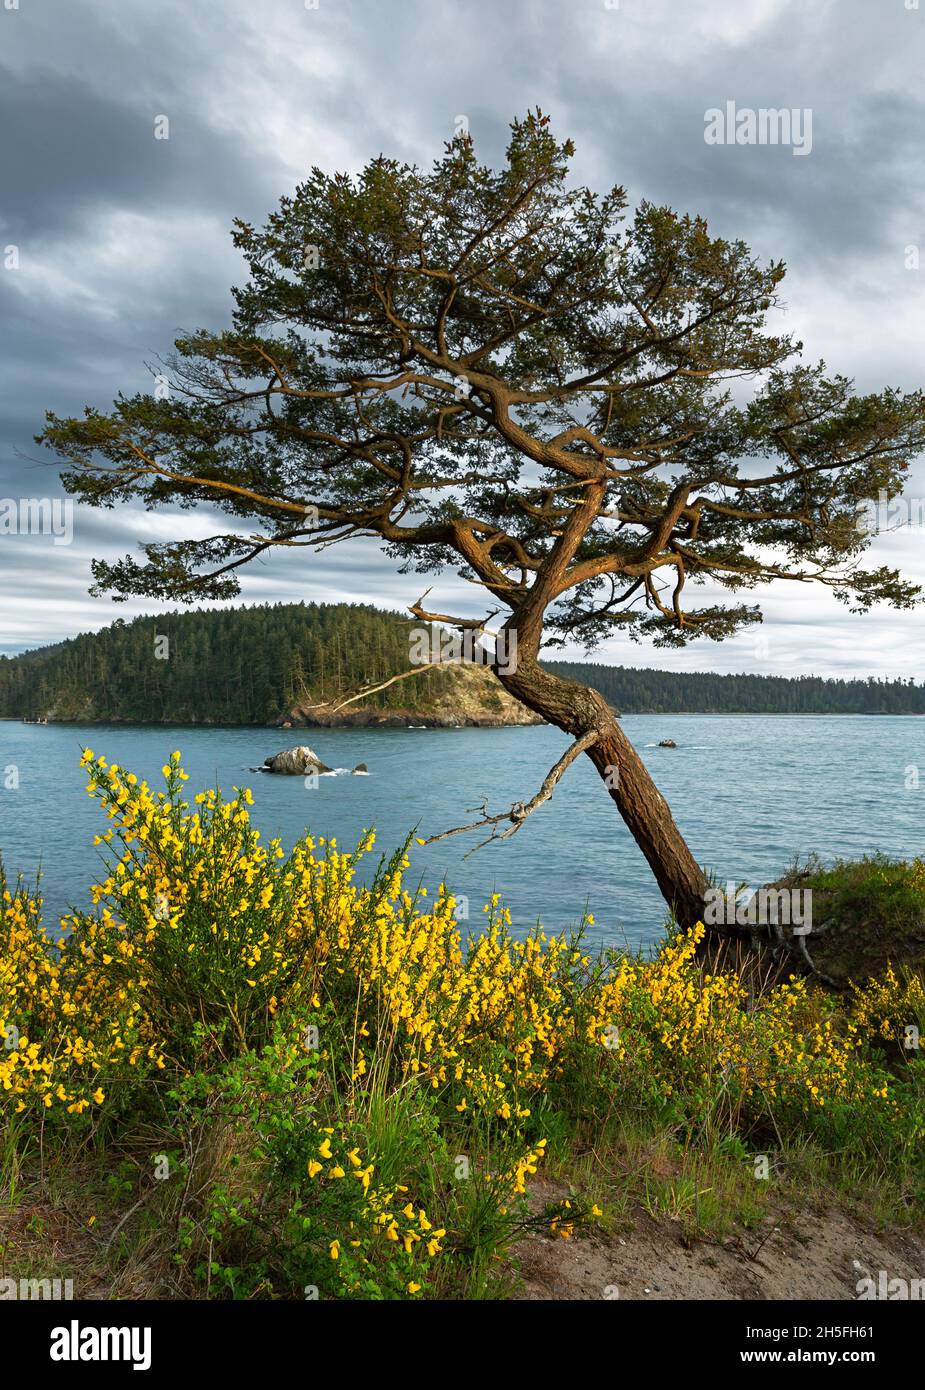 WA19741-00...WASHINGTON - A wind sculptured tree surrounded by scotch broom overlooking Bowman Bay in Deception Pass State Park. Stock Photo